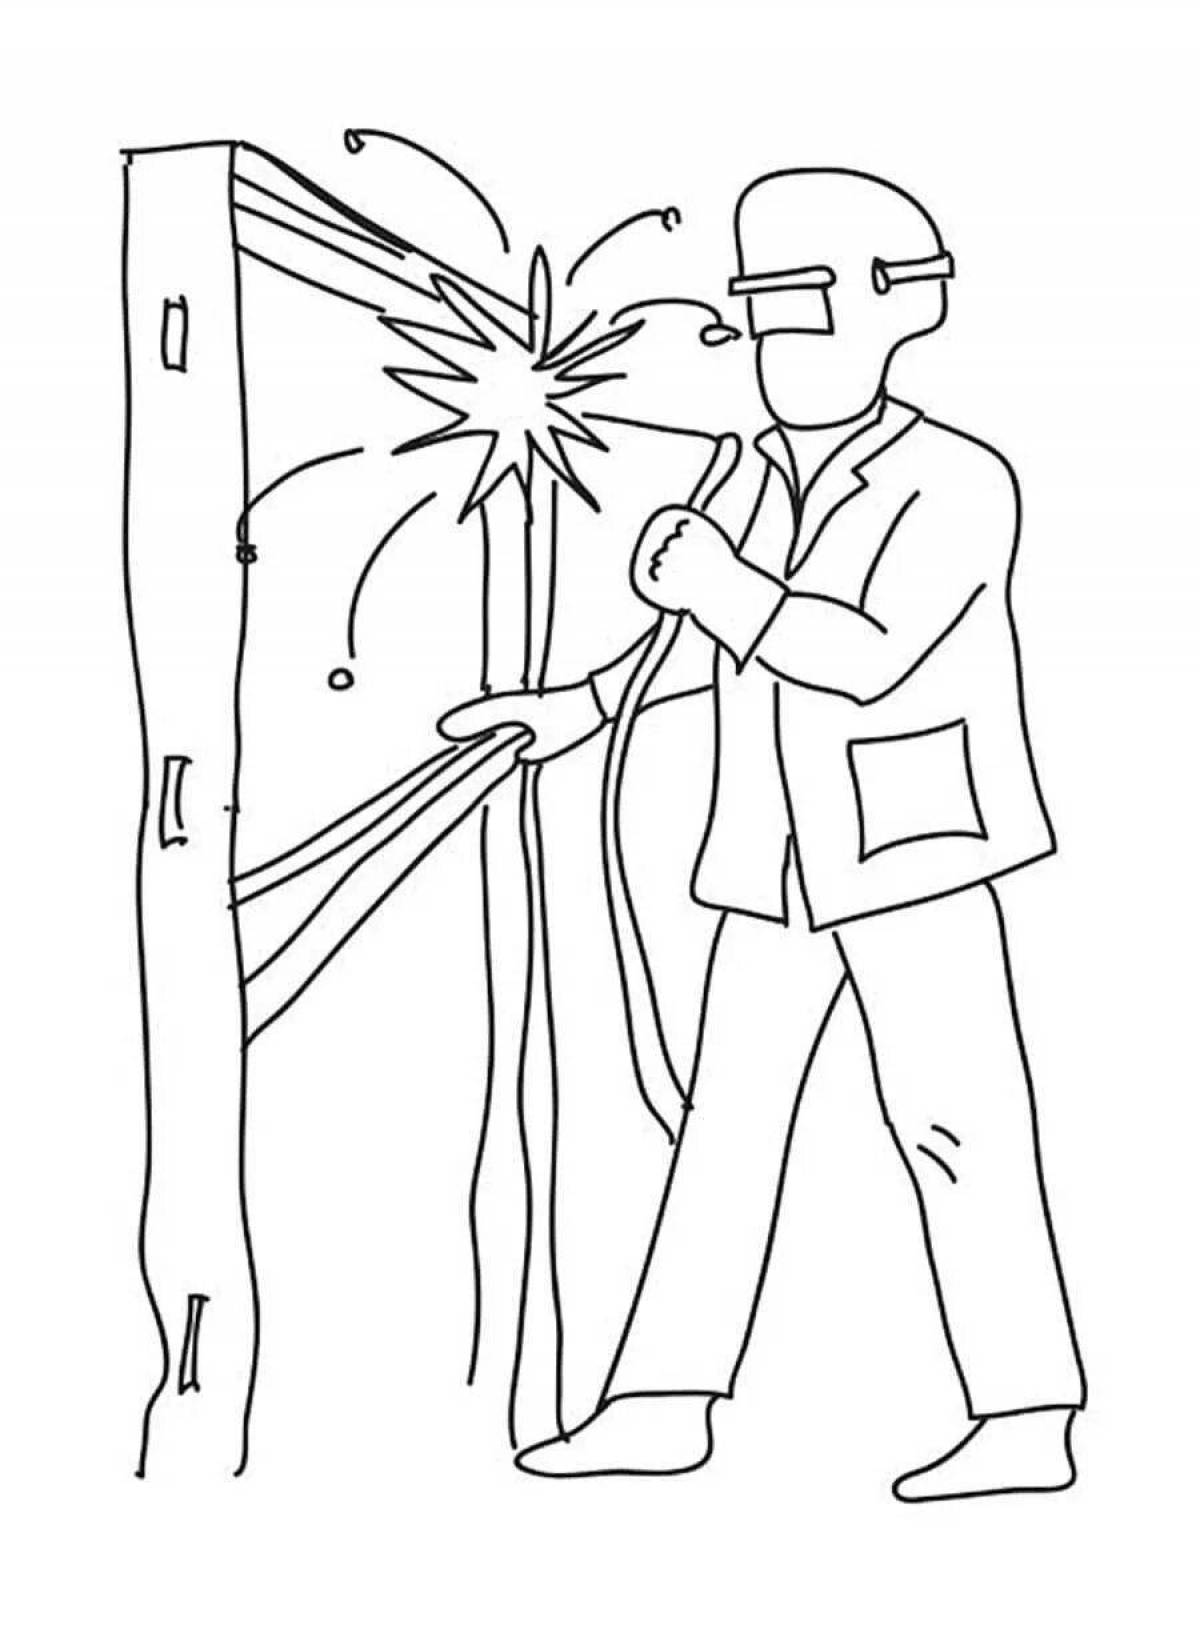 Charming welder coloring book